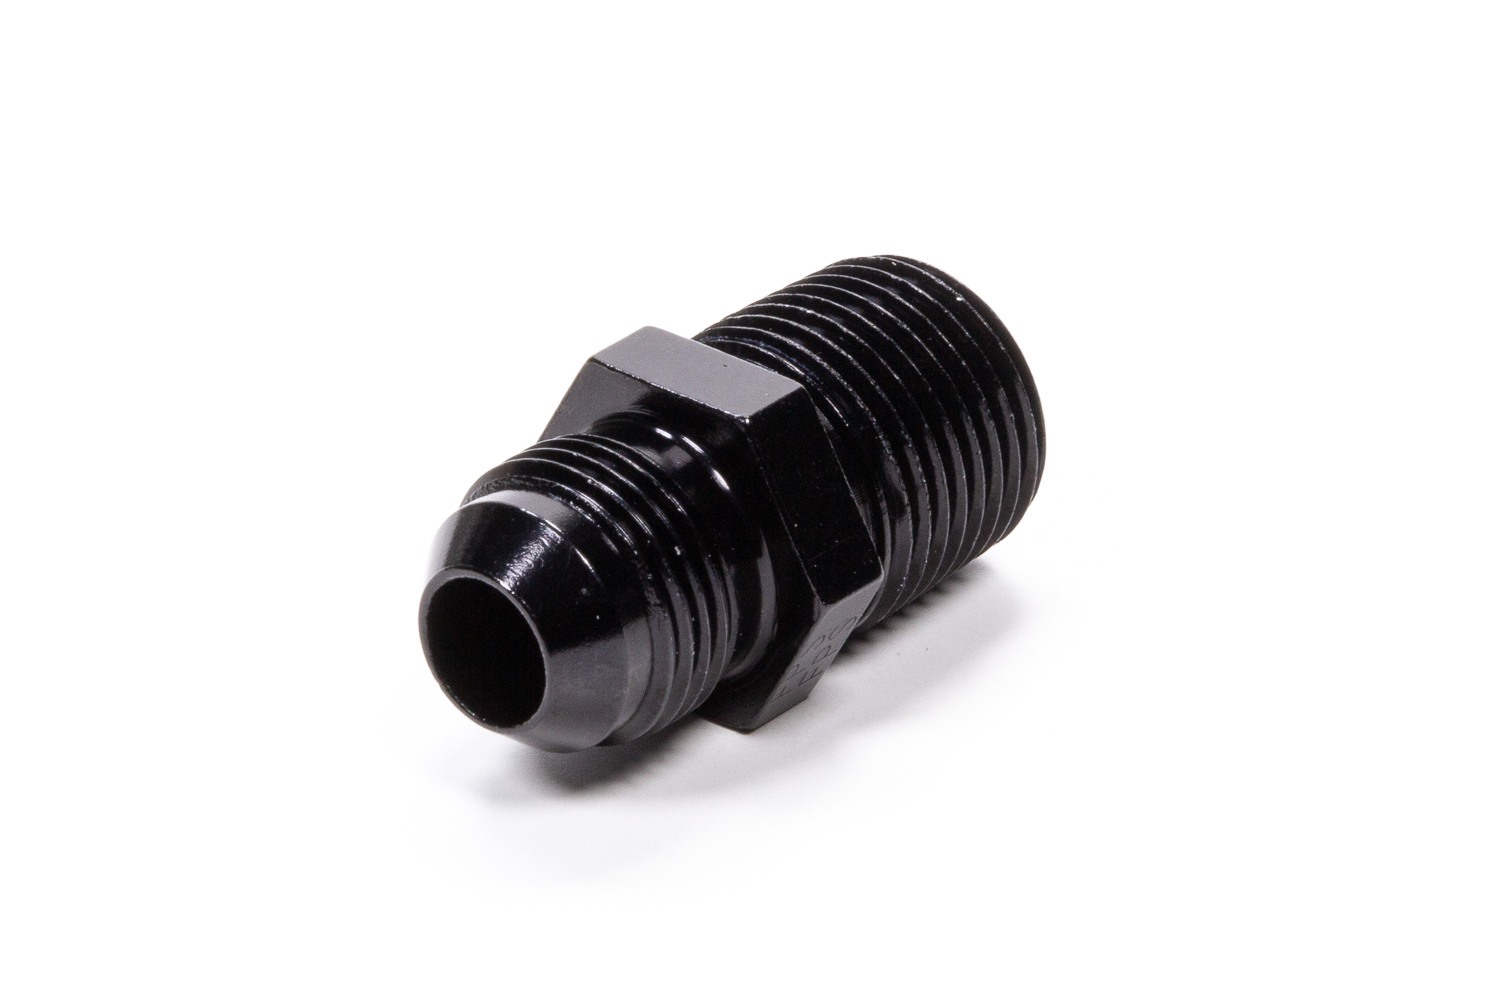 Fragola 481688-BL Fitting, Adapter, Straight, 8 AN Male to 1/2 in NPT Male, Aluminum, Black Anodized, Each